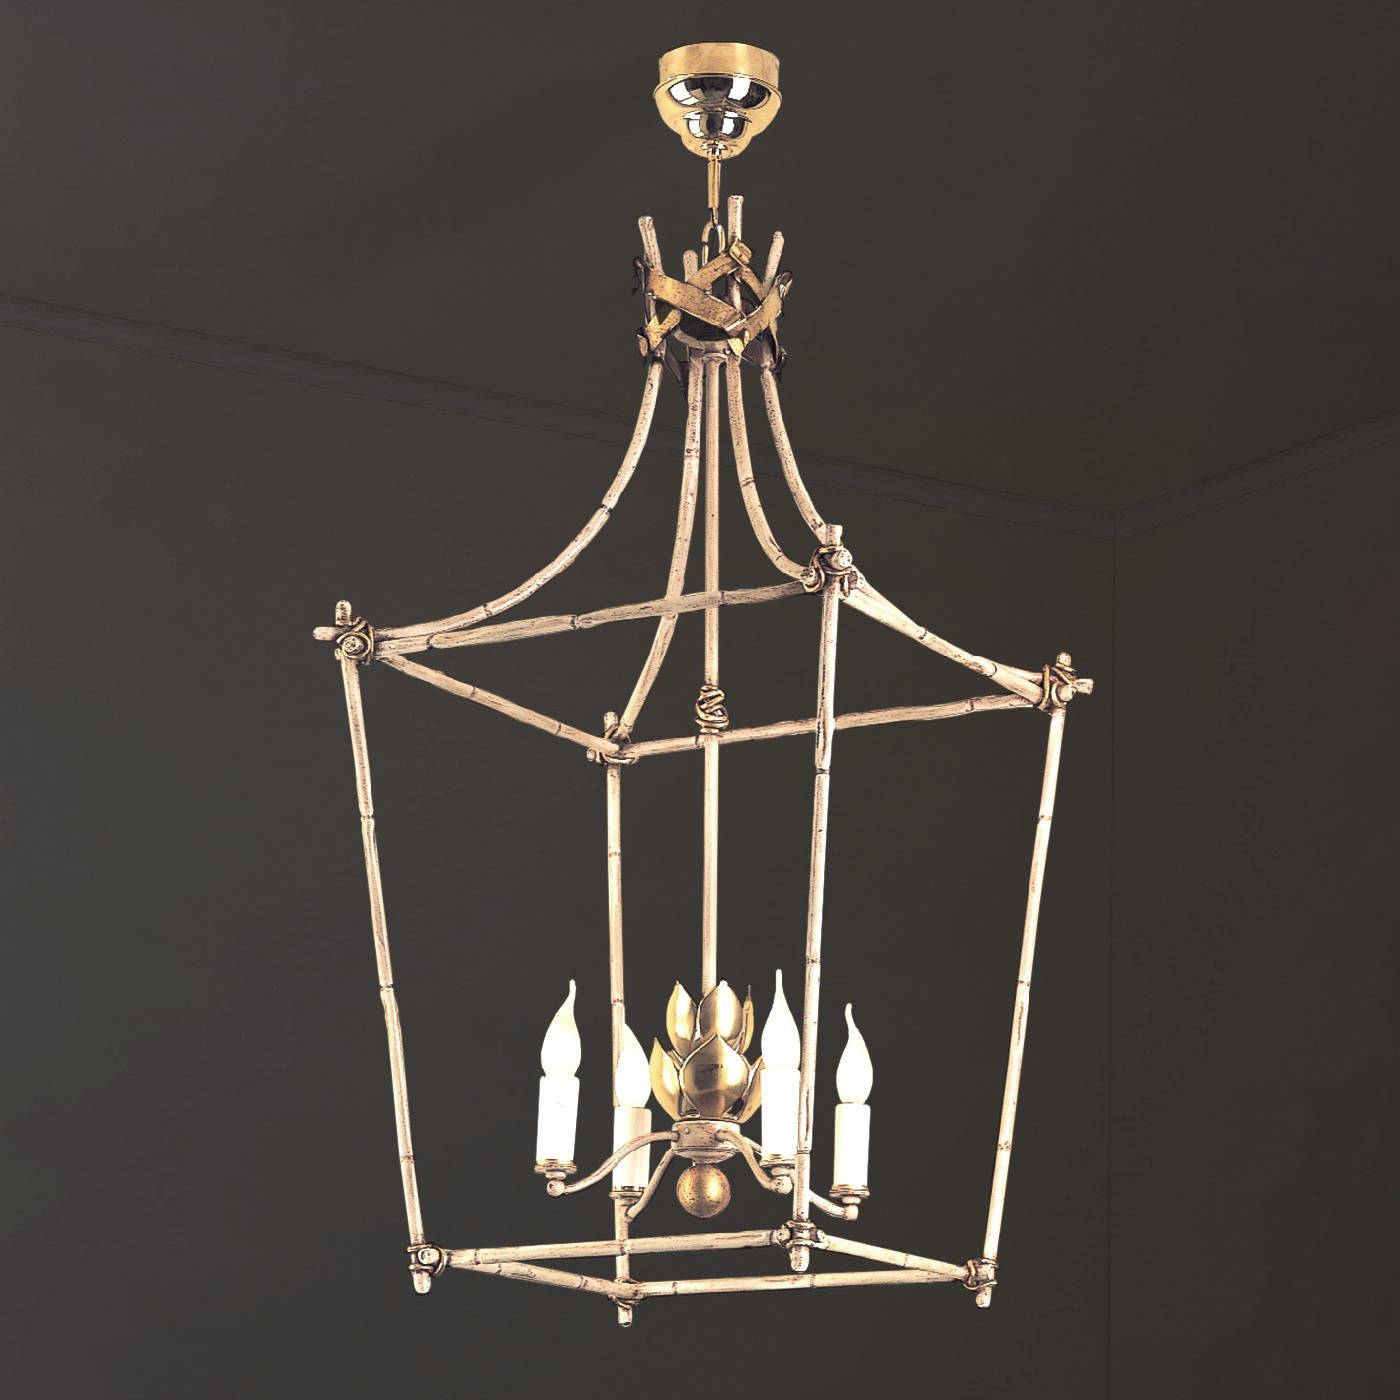 Best paired with the bamboo sconce or as a standout element to add a rustic-chic accent in a modern living or dining room, this stunning chandelier will not go unnoticed, thanks to its unique design and strong visual impact. Its silhouette crafted